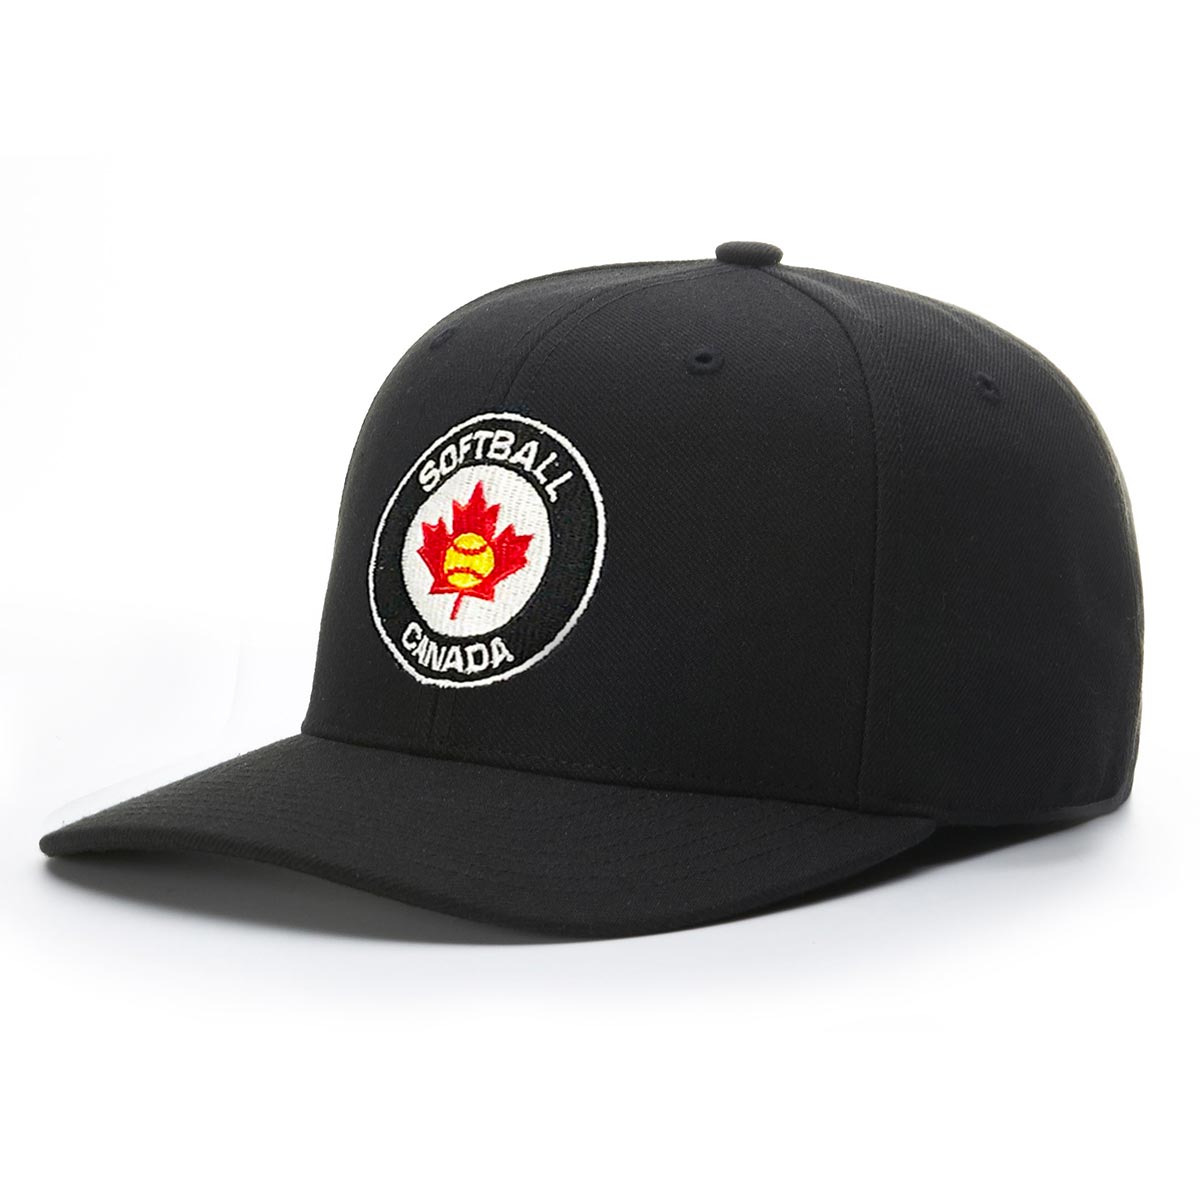 Softball Canada 550 Fitted Umpire Base Hat